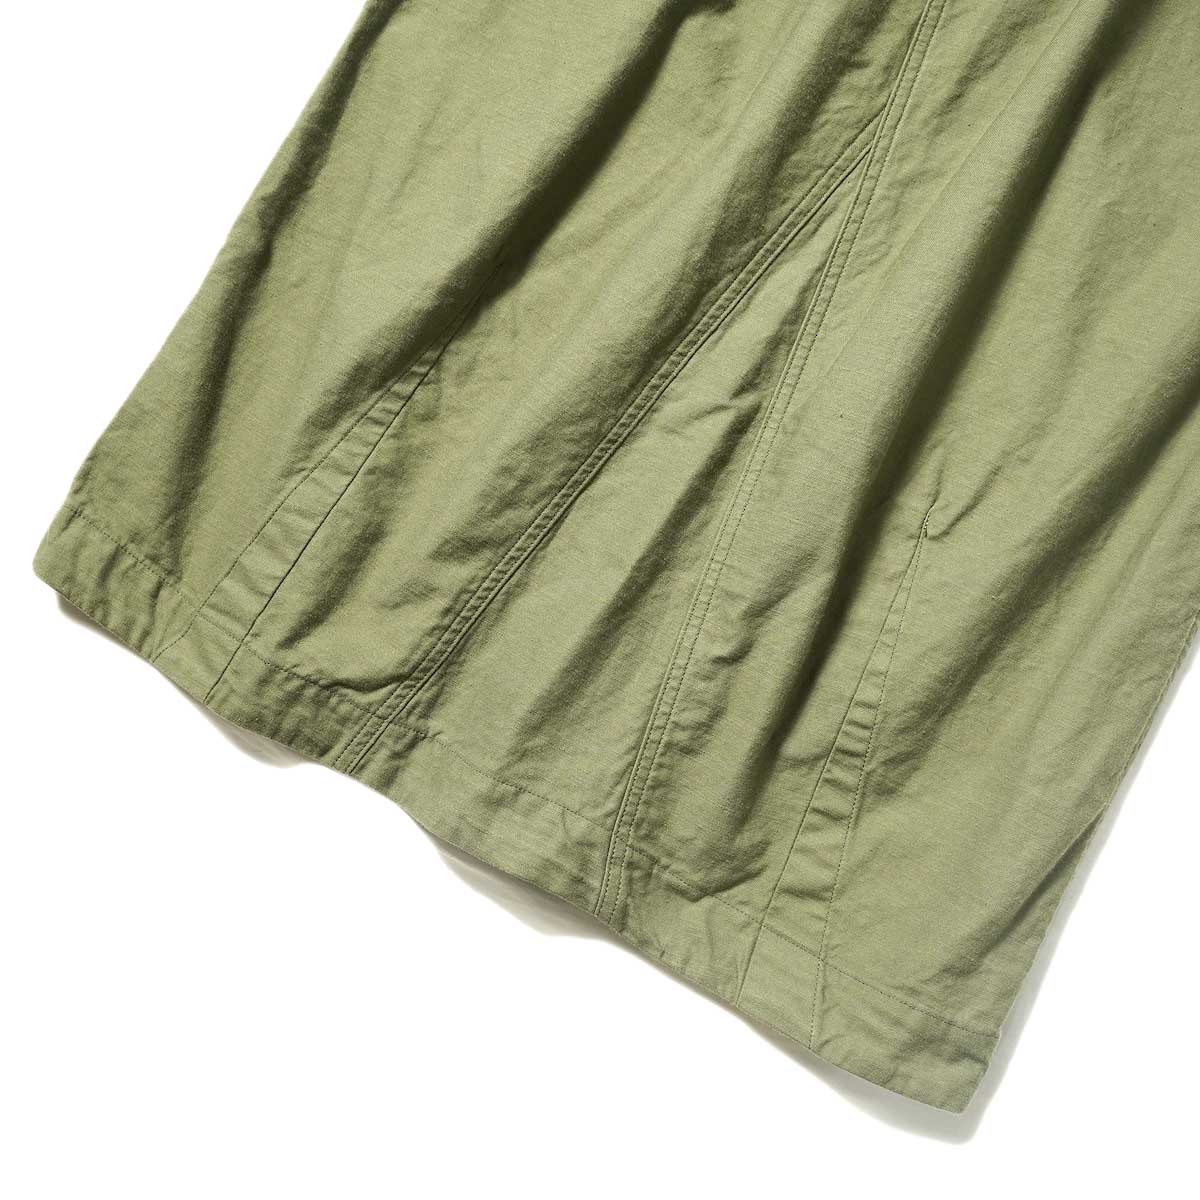 Needles / String Fatigue Skirt - Back Sateen (Olive) 正面・裾